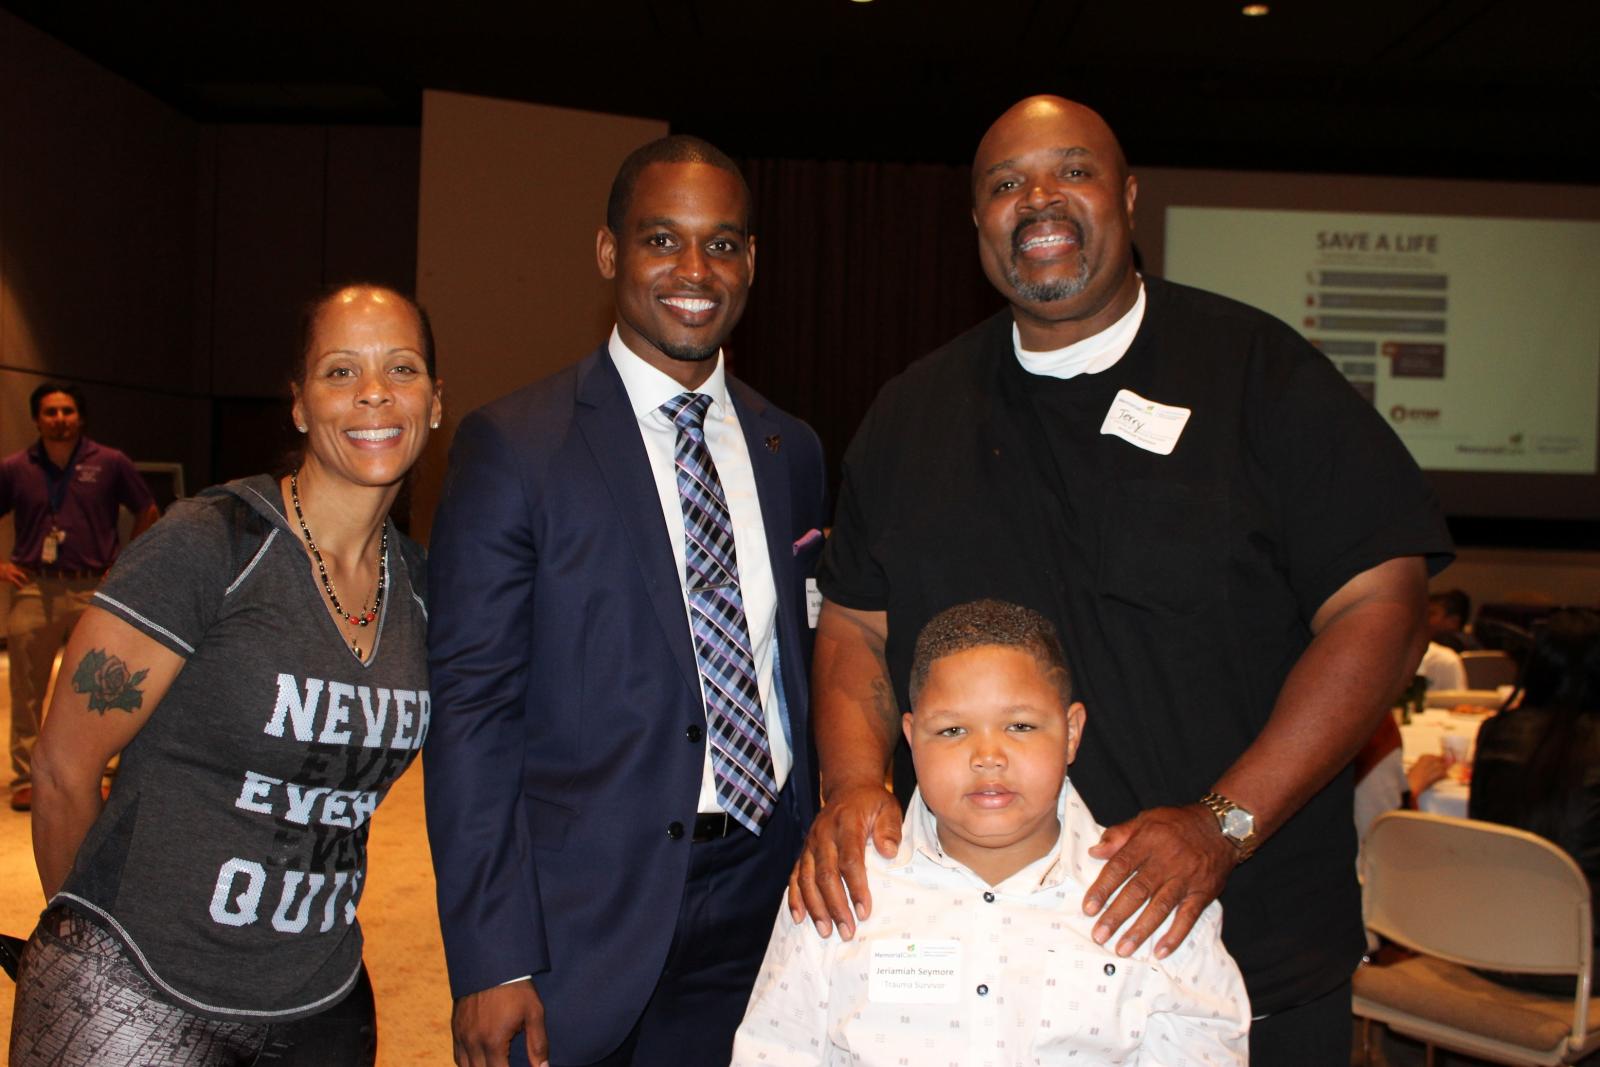 Image from a reunion of trauma survivors - Jeremiah and his family